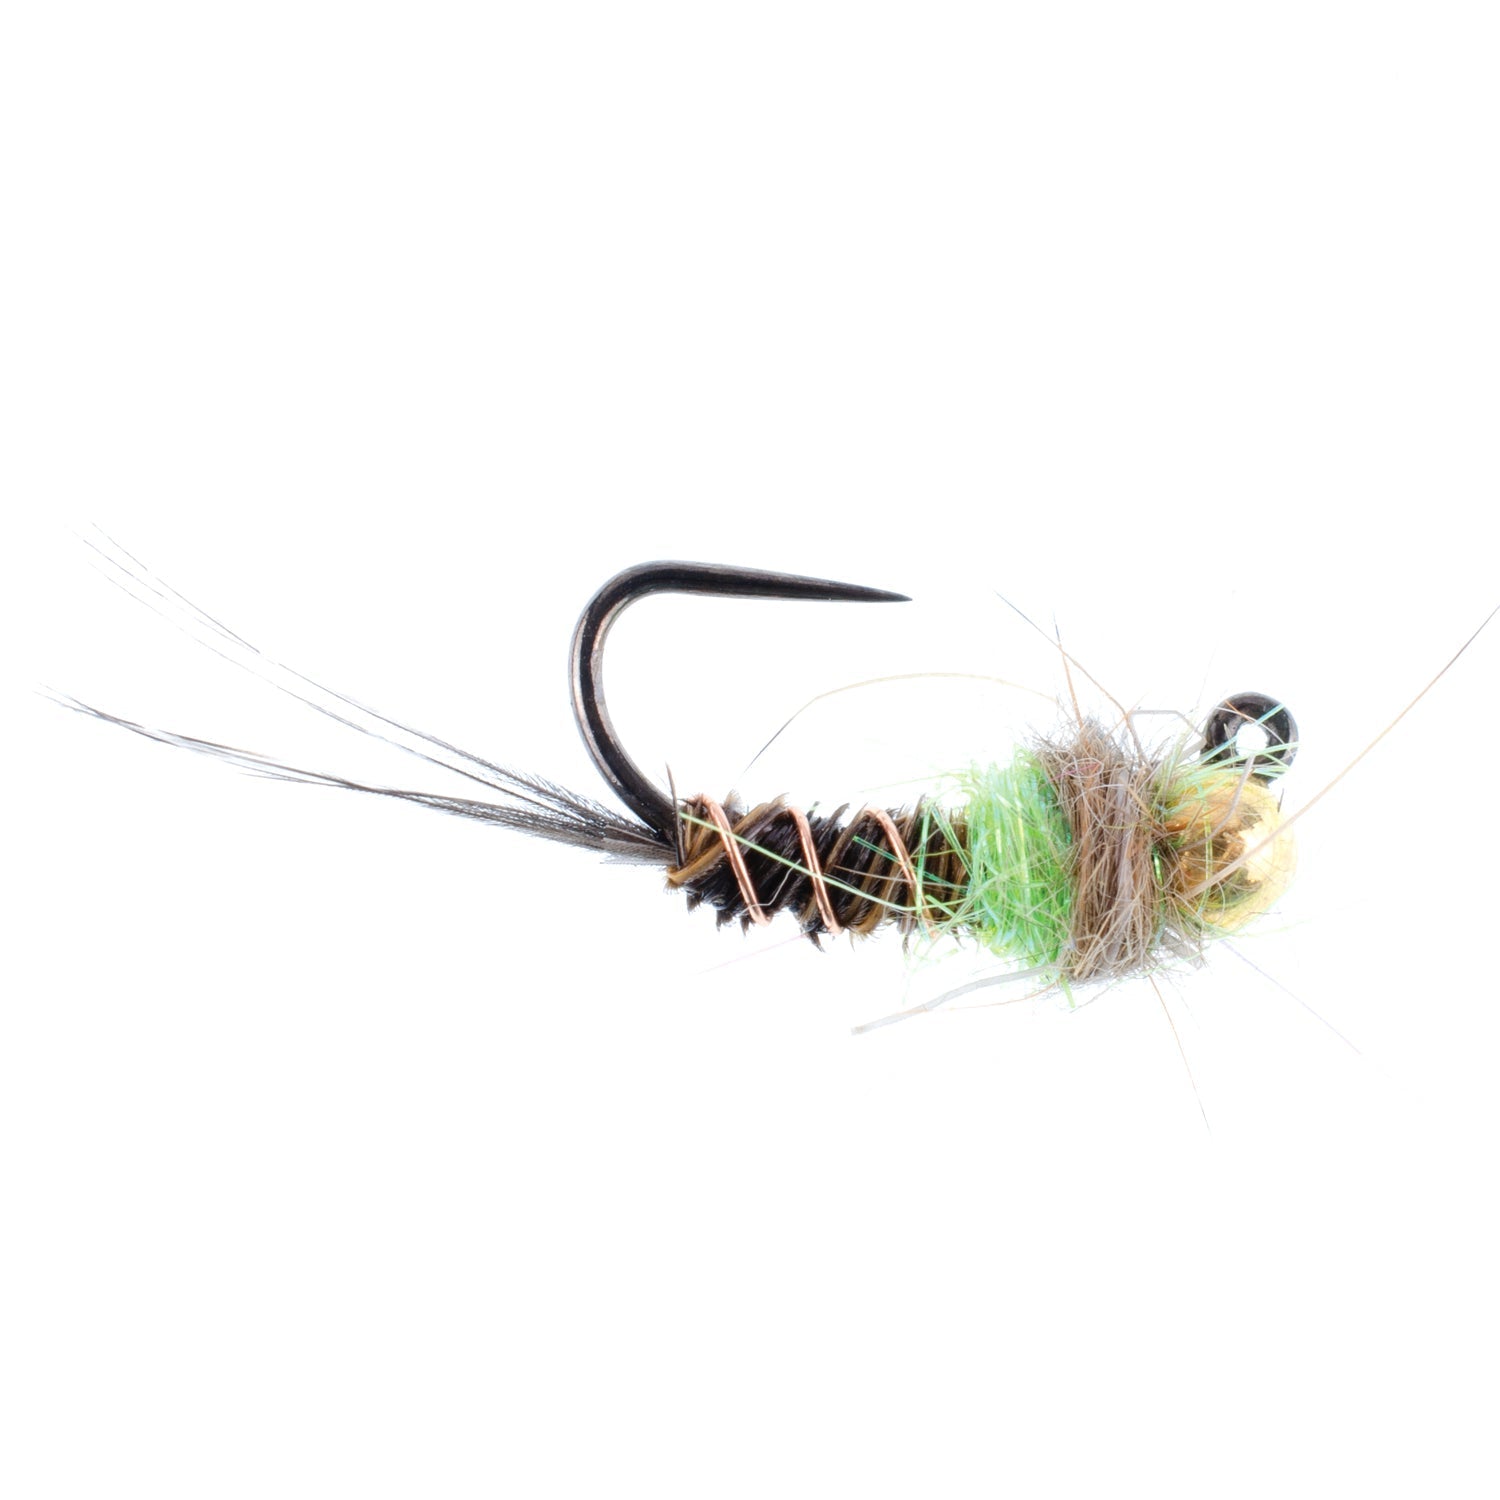 Tungsten Bead Hot Spot Pheasant Tail Tactical Jig Chartreuse Czech Nymph Euro Nymphing Fly - 6 Flies Size 12